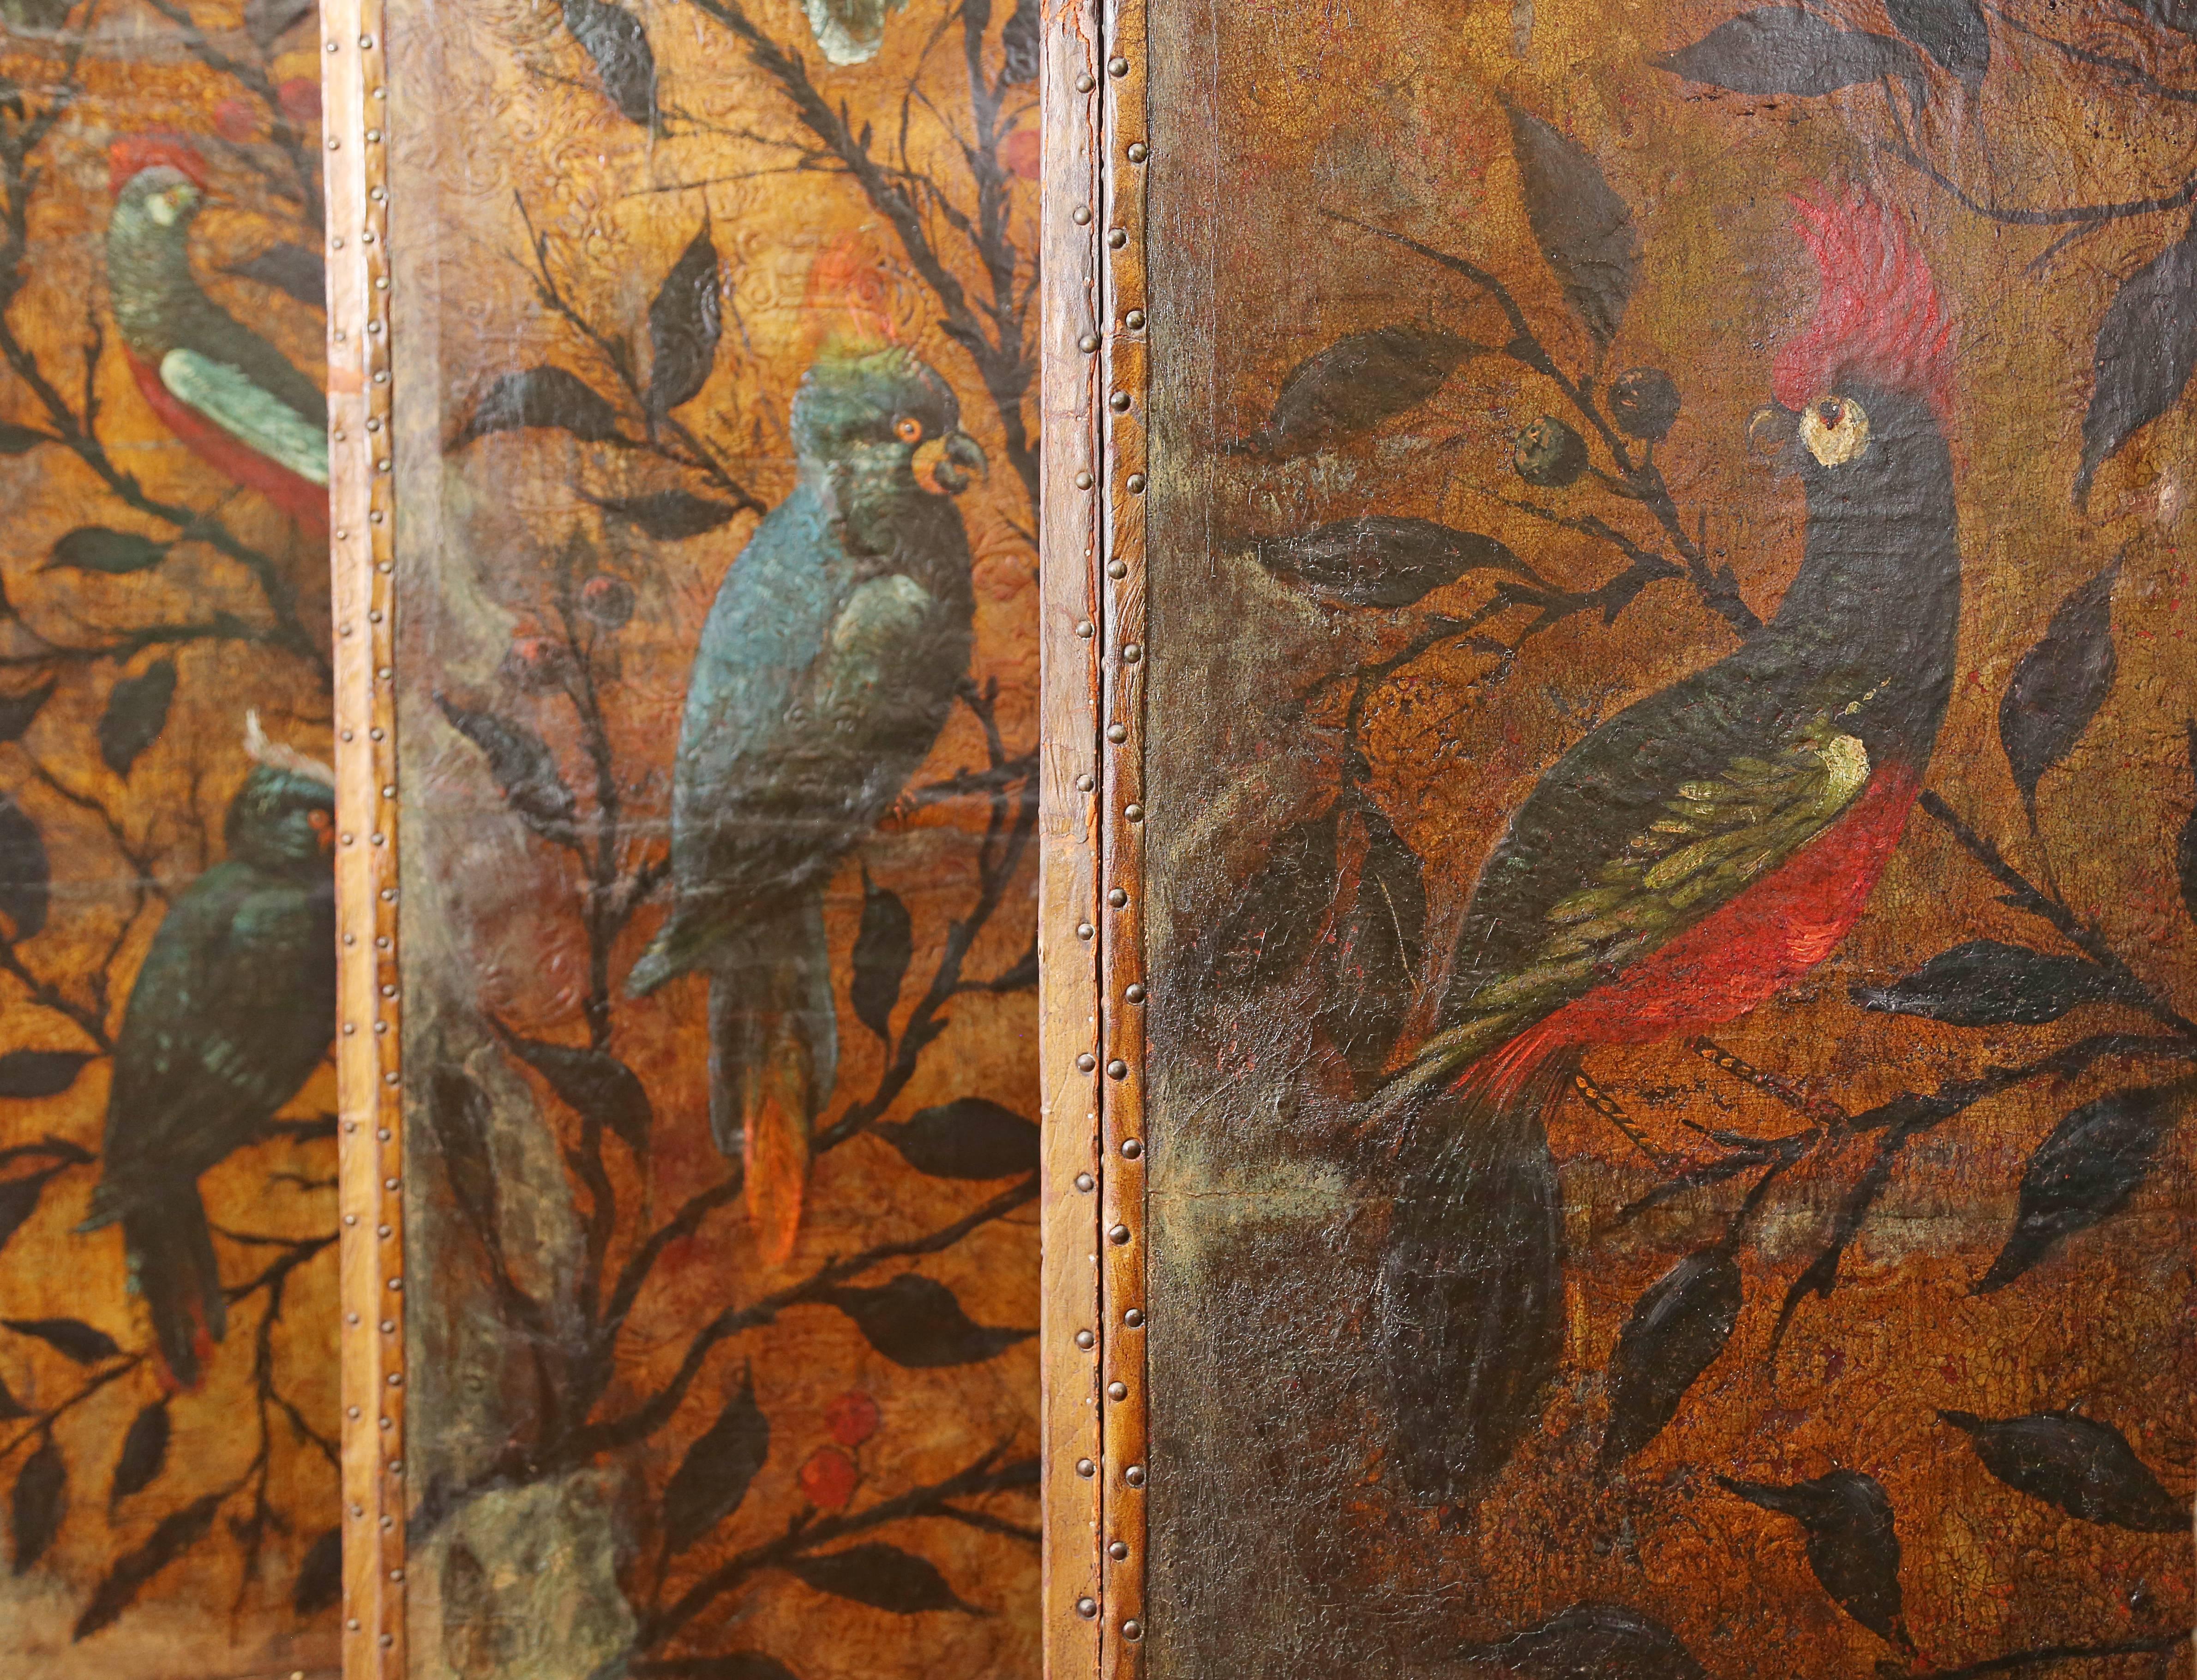 Each with four panels vibrantly painted with parrots and other tropical birds perched on tree boughs on a gilt and foliate-embossed ground. Photograph has screens arranged as if one long continuous screen. Each panel measures 24